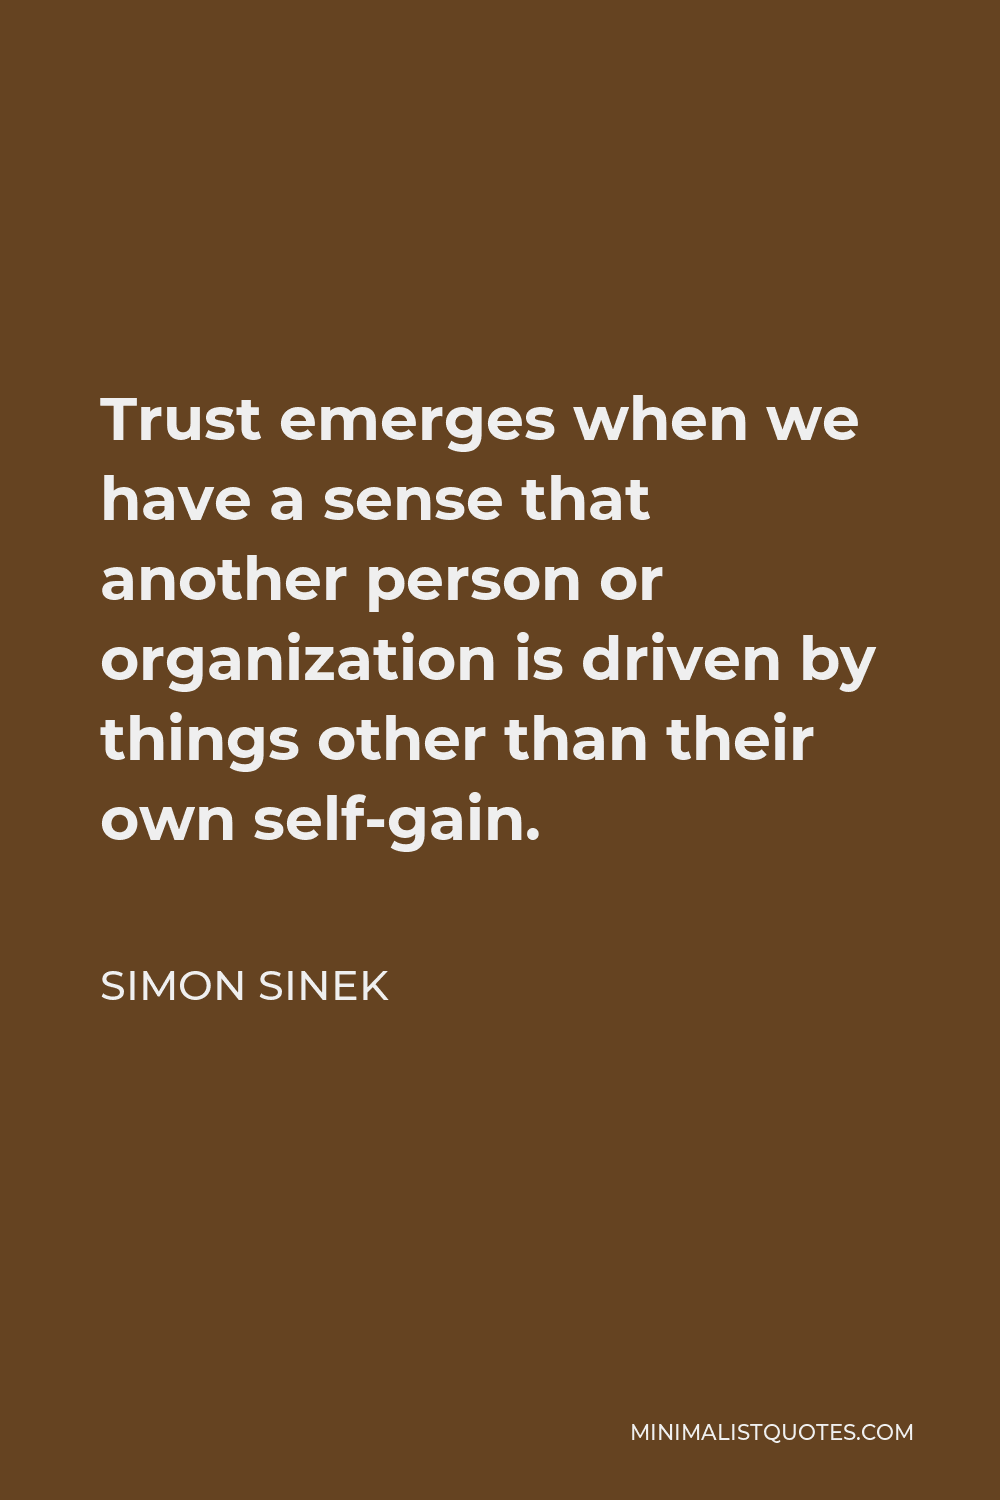 Simon Sinek Quote - Trust emerges when we have a sense that another person or organization is driven by things other than their own self-gain.